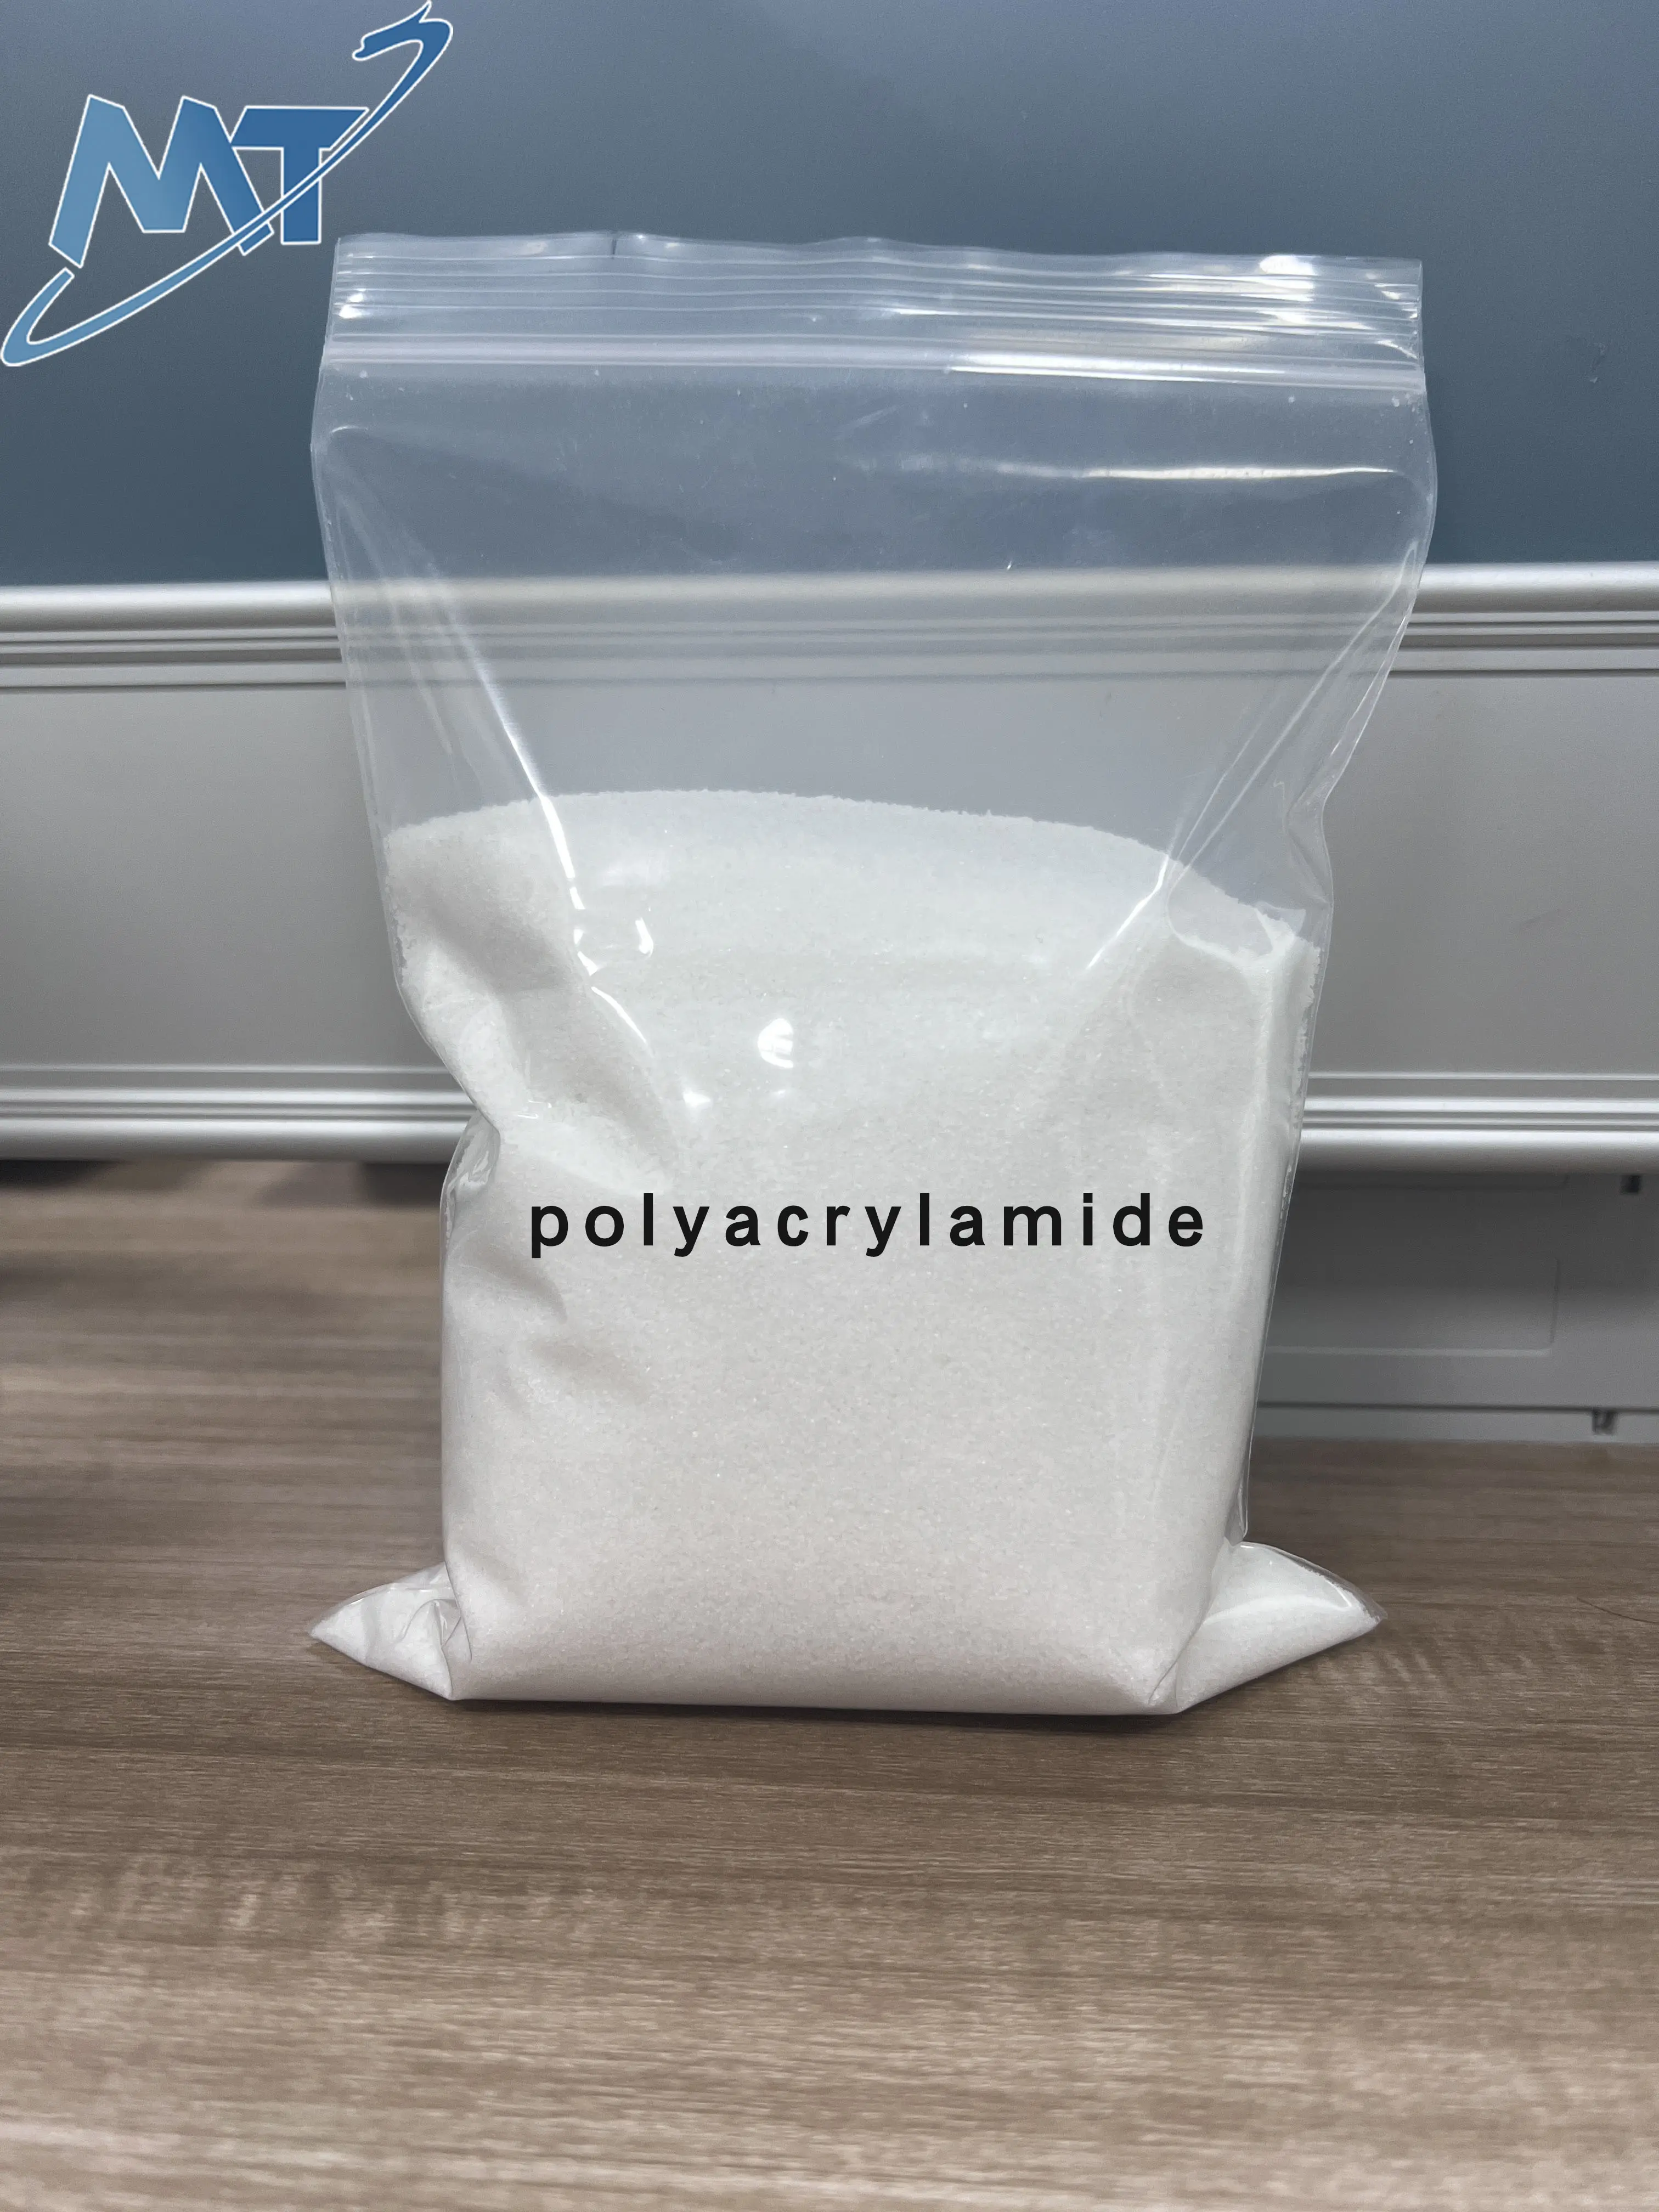 Water treatment chemical flocculant nonionic anionic cationic polyacrylamide